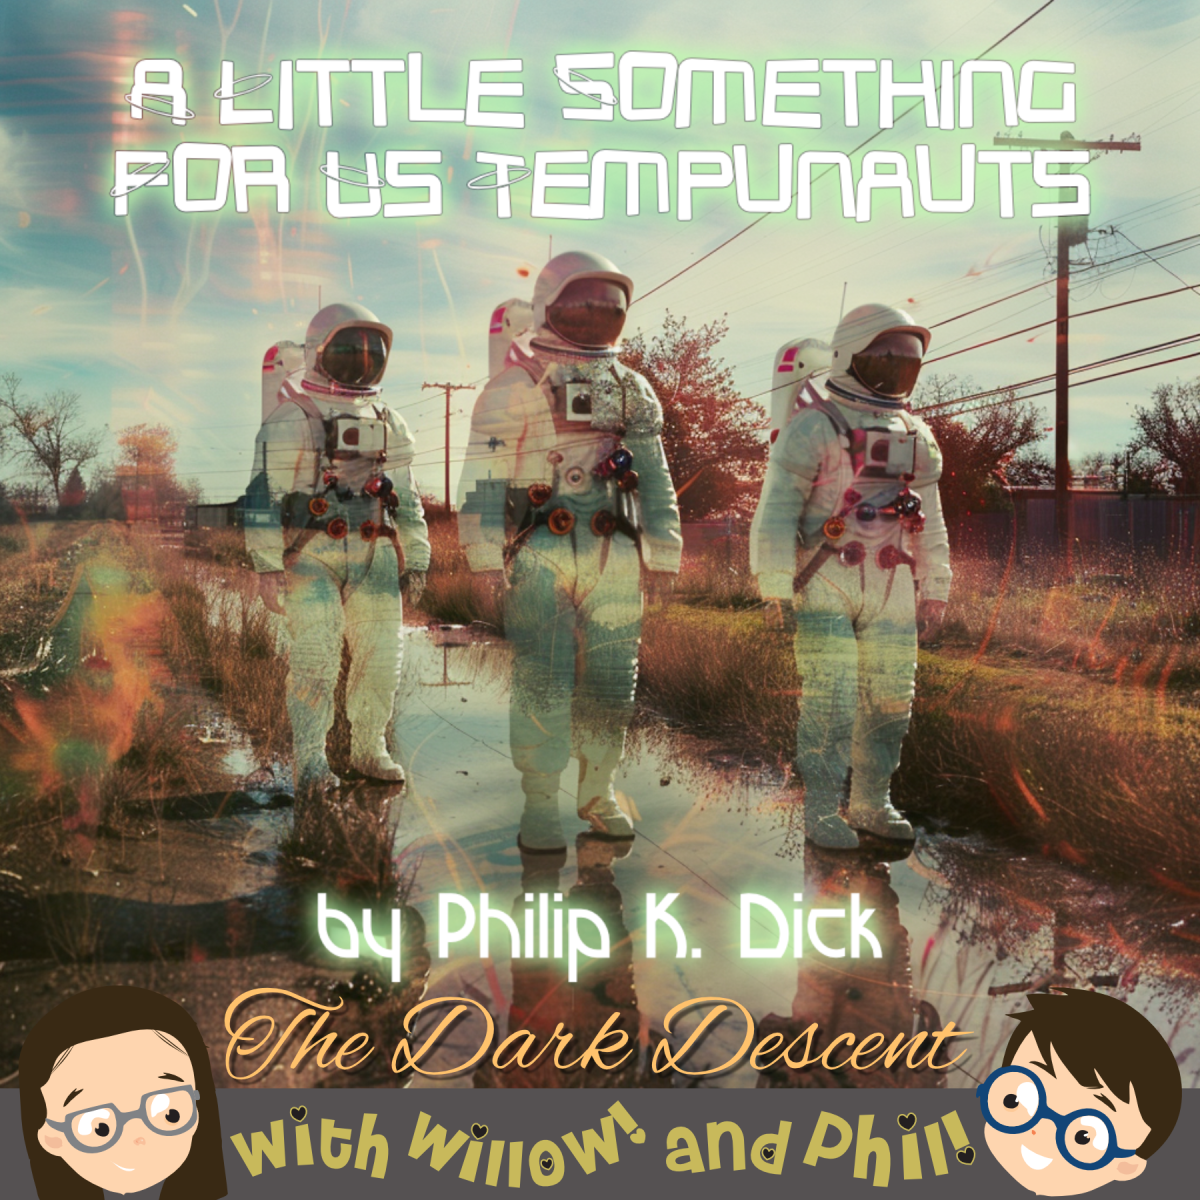 The Dark Descent – “A Little Something for Us Tempunauts” by Philip K. Dick